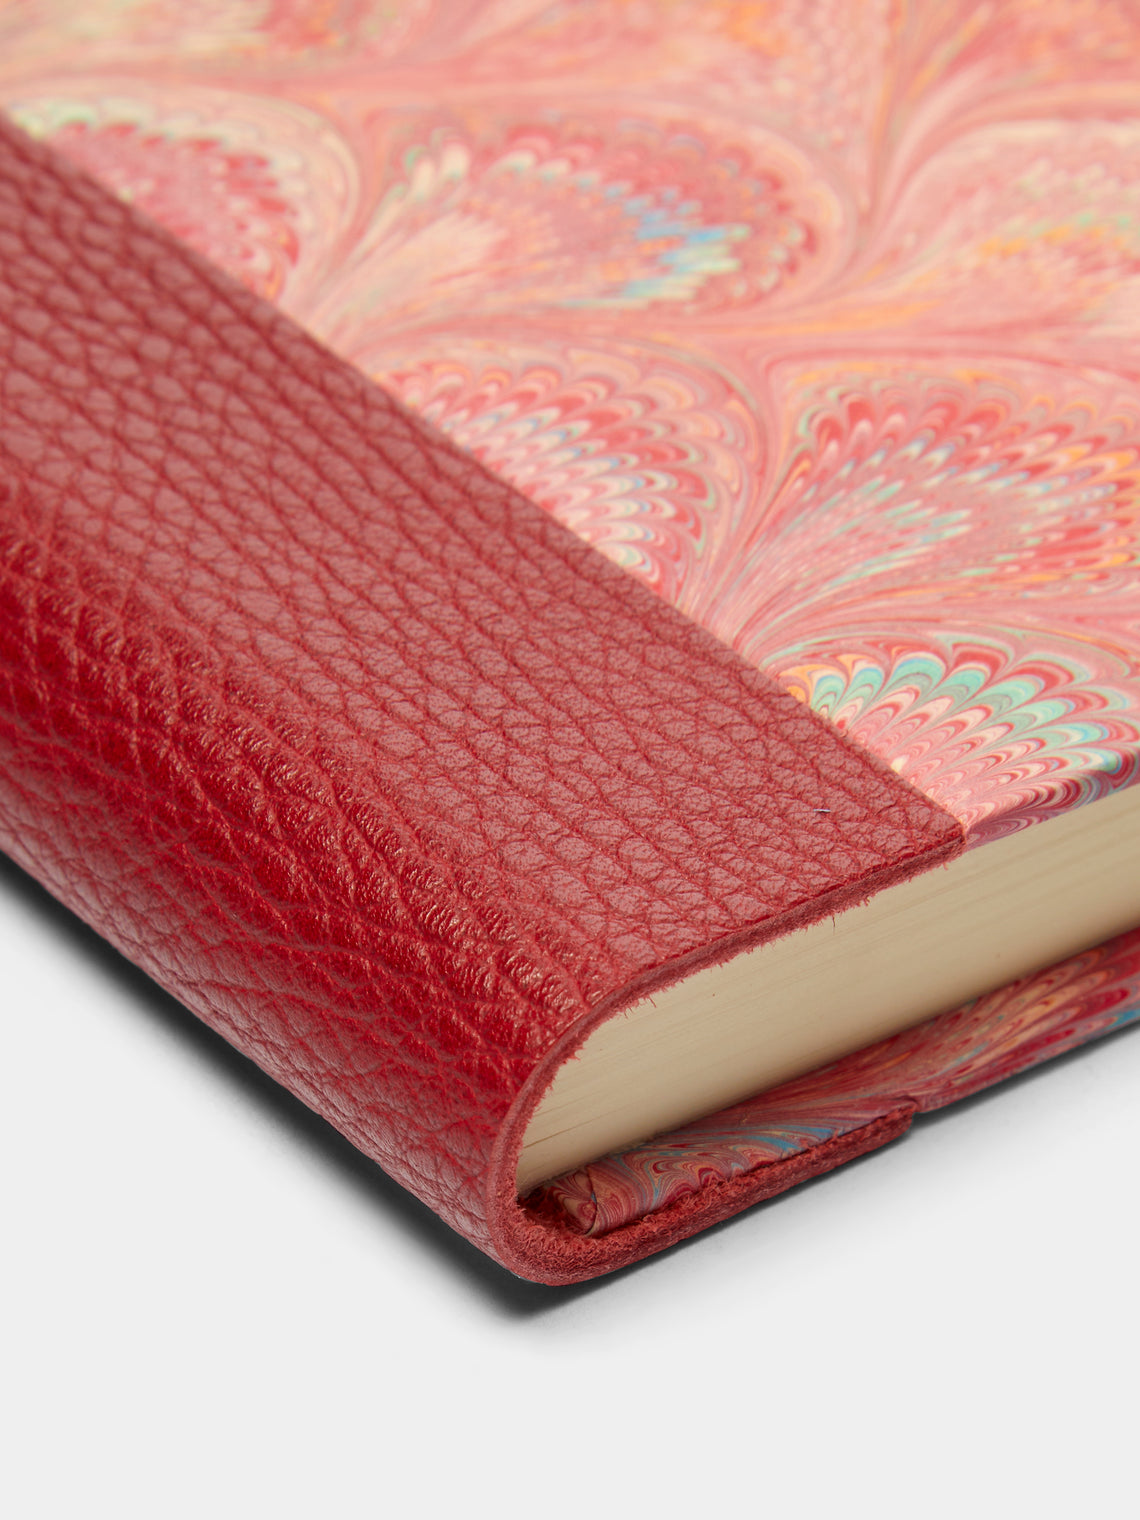 Giannini Firenze - Hand-Marbled Leather Bound Notebook - Red - ABASK